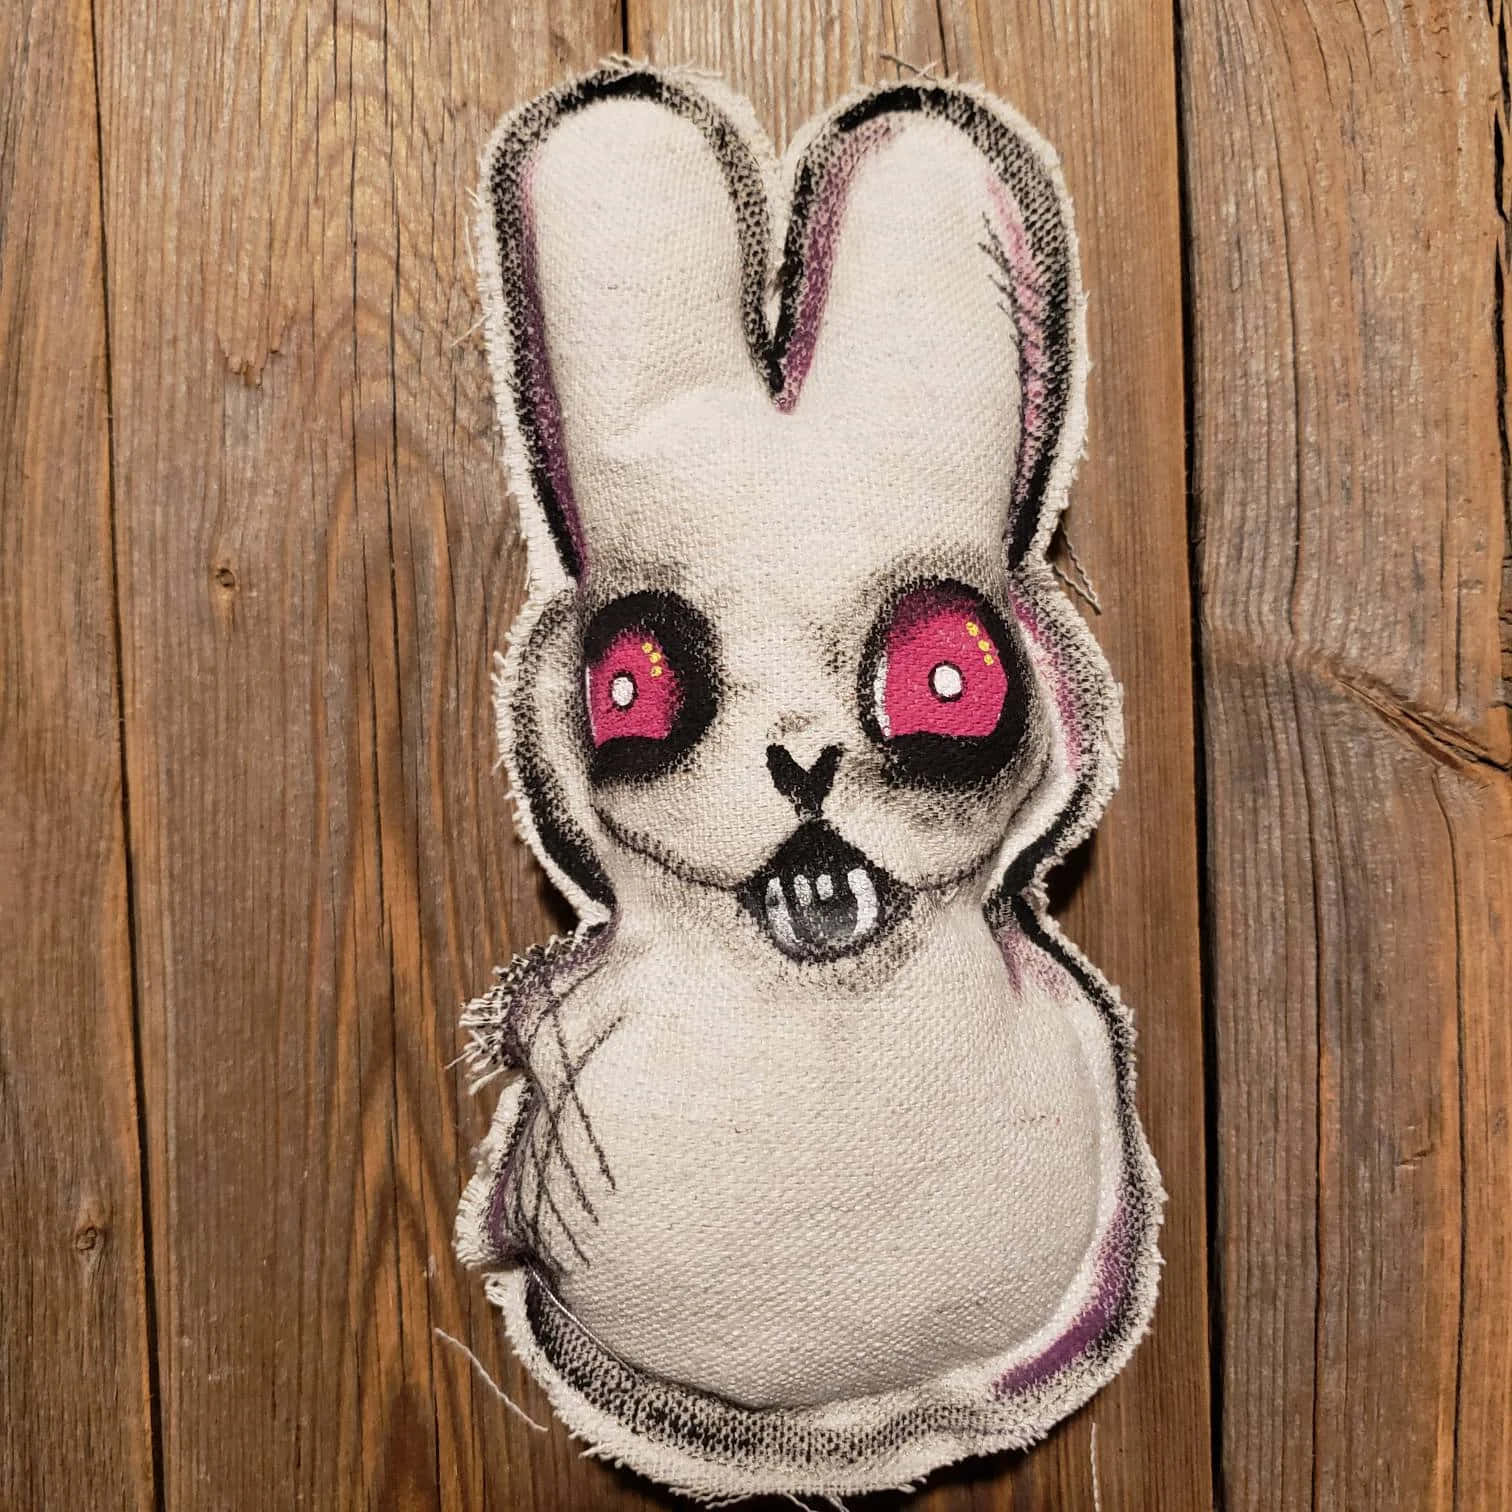 "Mystic Easter Bunny Breaks Through to the Other Realm"